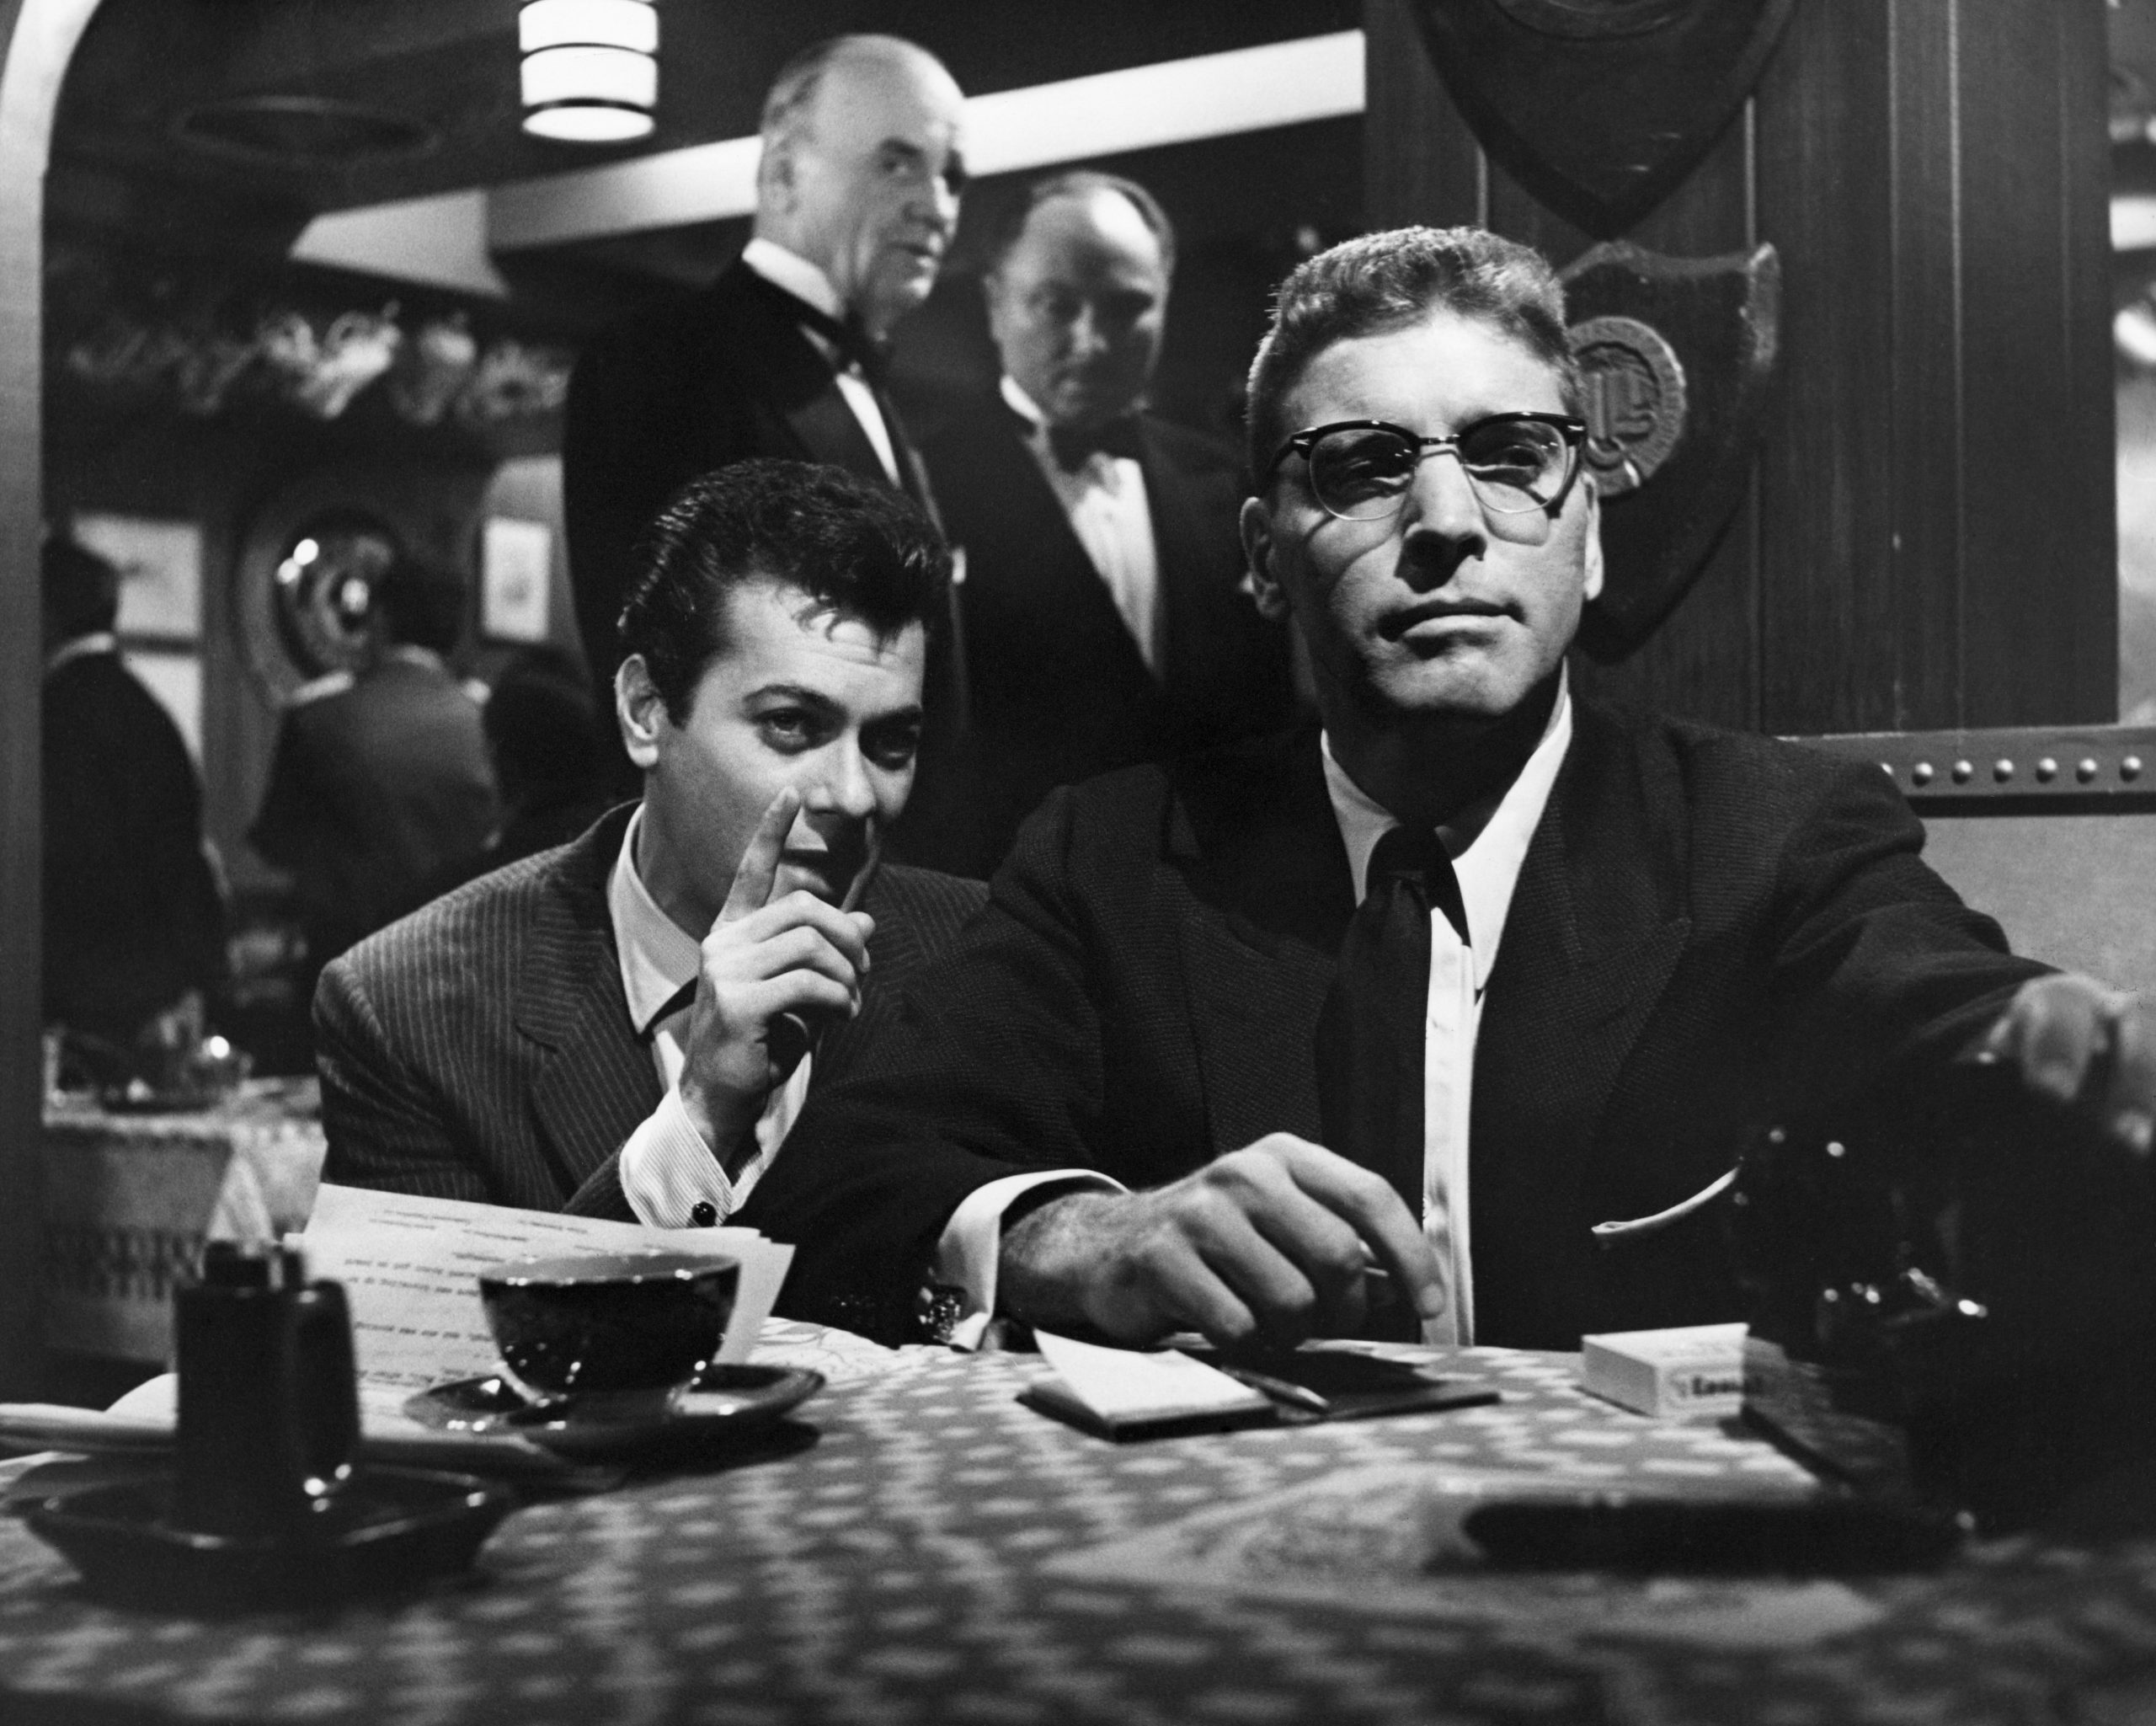 Tony Curtis and Burt Lancaster in the Sweet Smell of Success